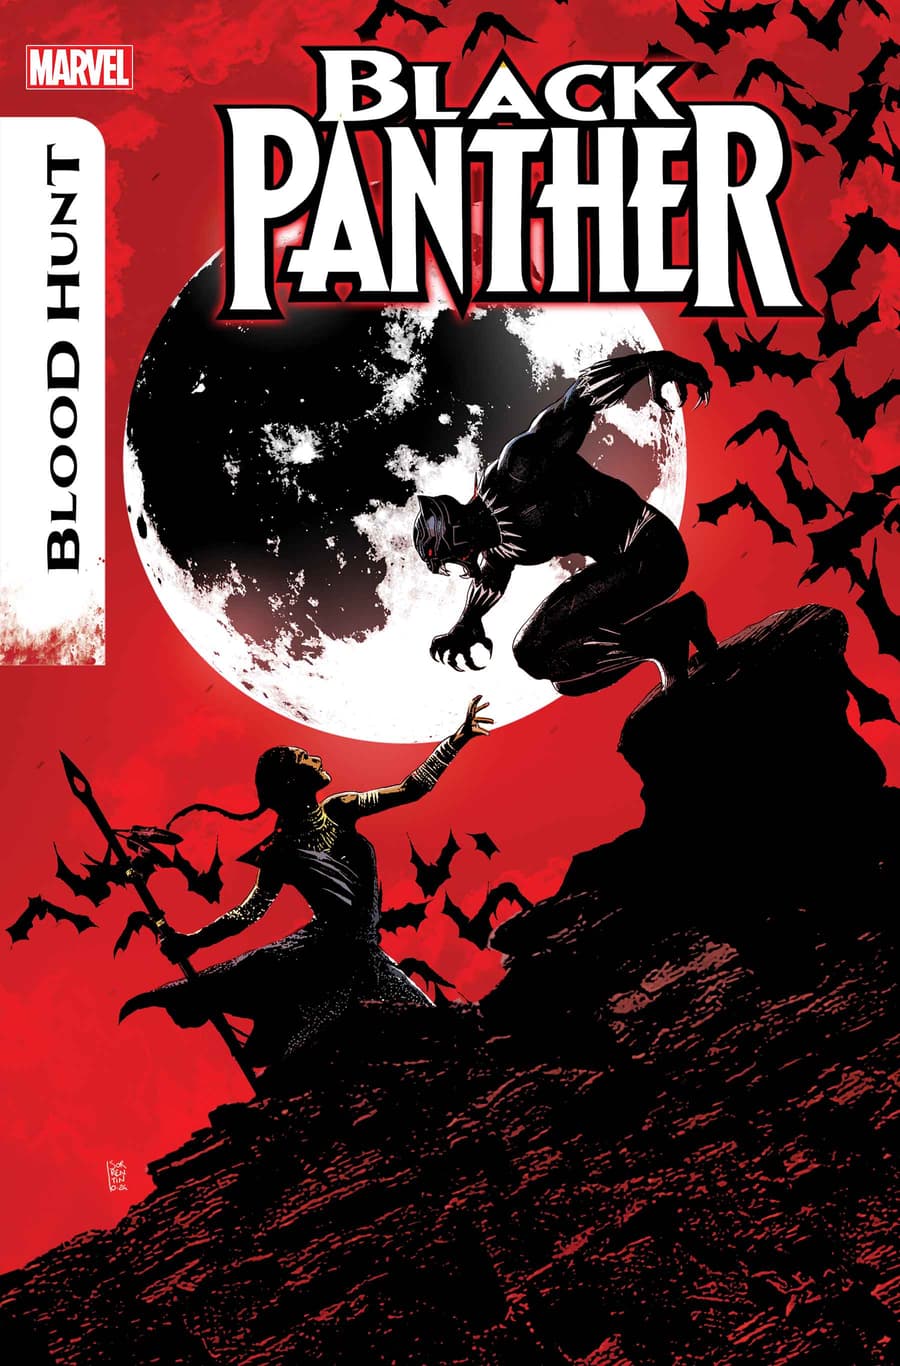 BLACK PANTHER: BLOOD HUNT #2 cover by Andrea Sorrentino